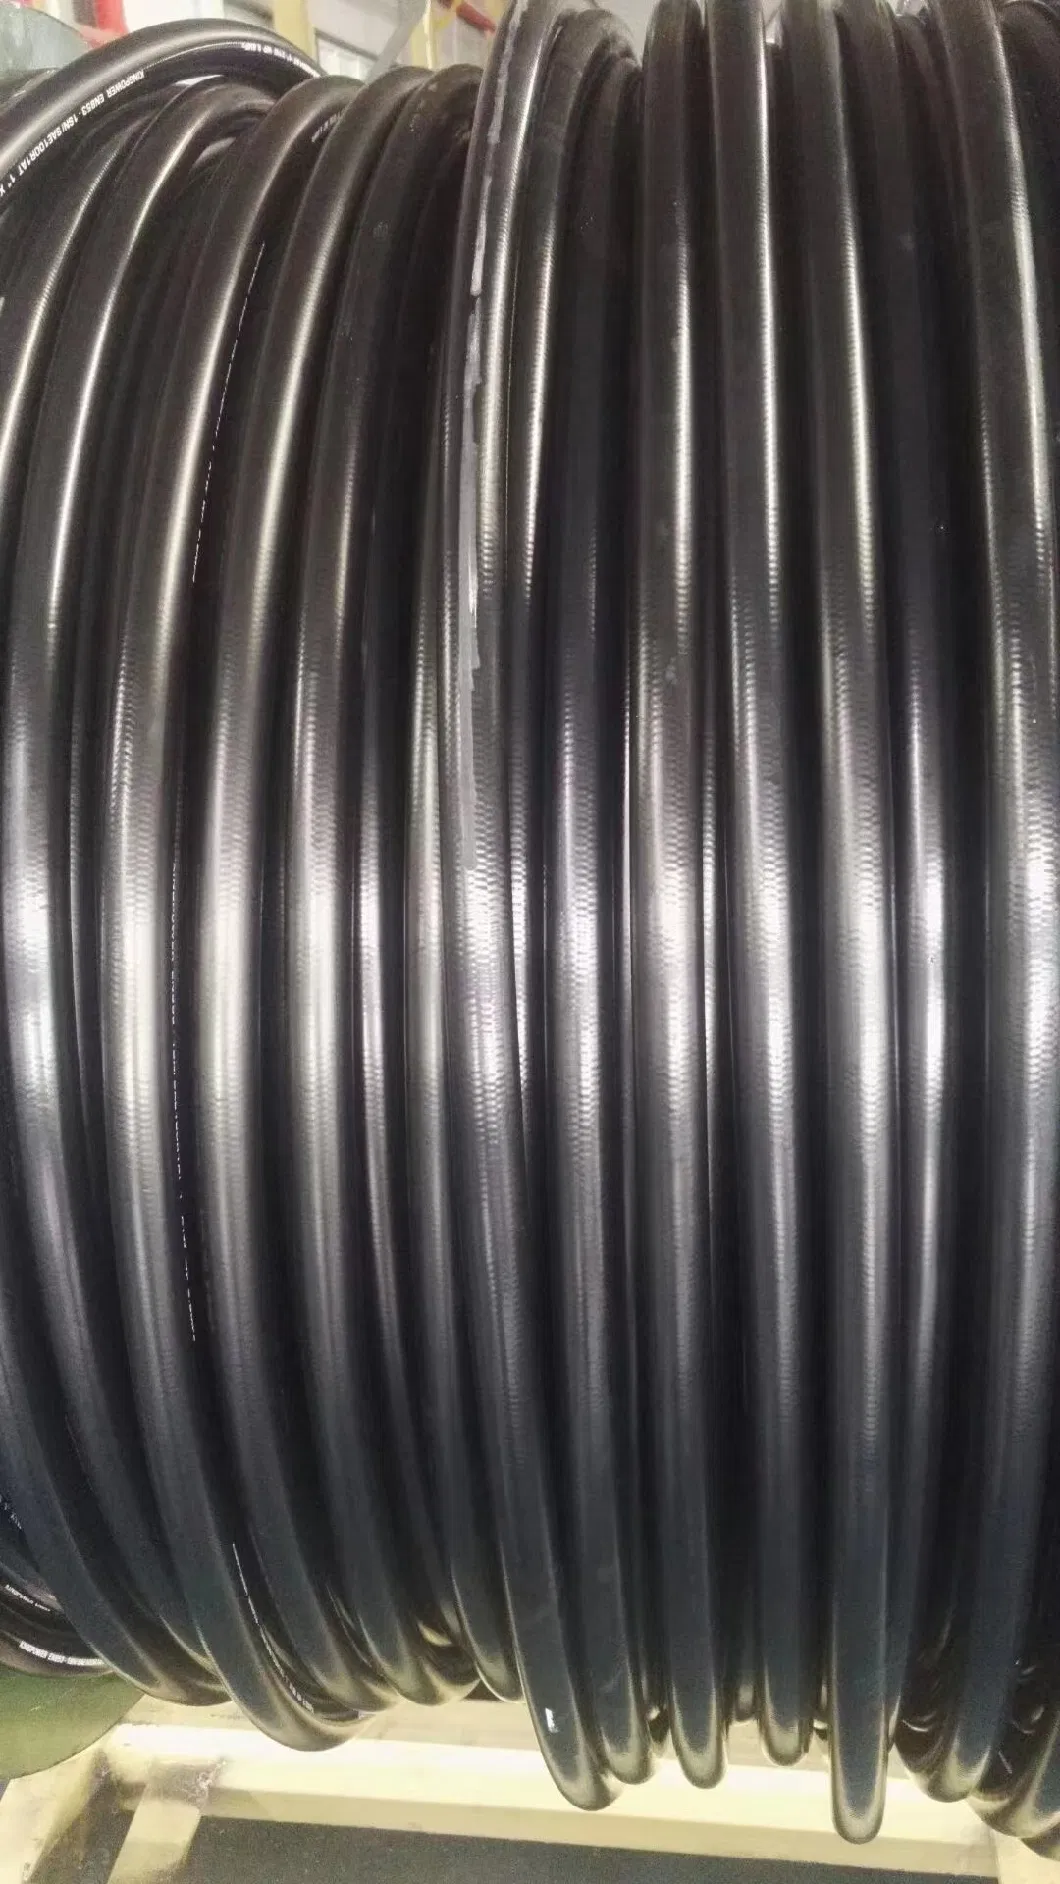 China Factory Supply High Quality Weather and Oil Resistant Steel Wire Braided Rubber Hydraulic Hose with Smooth Cover